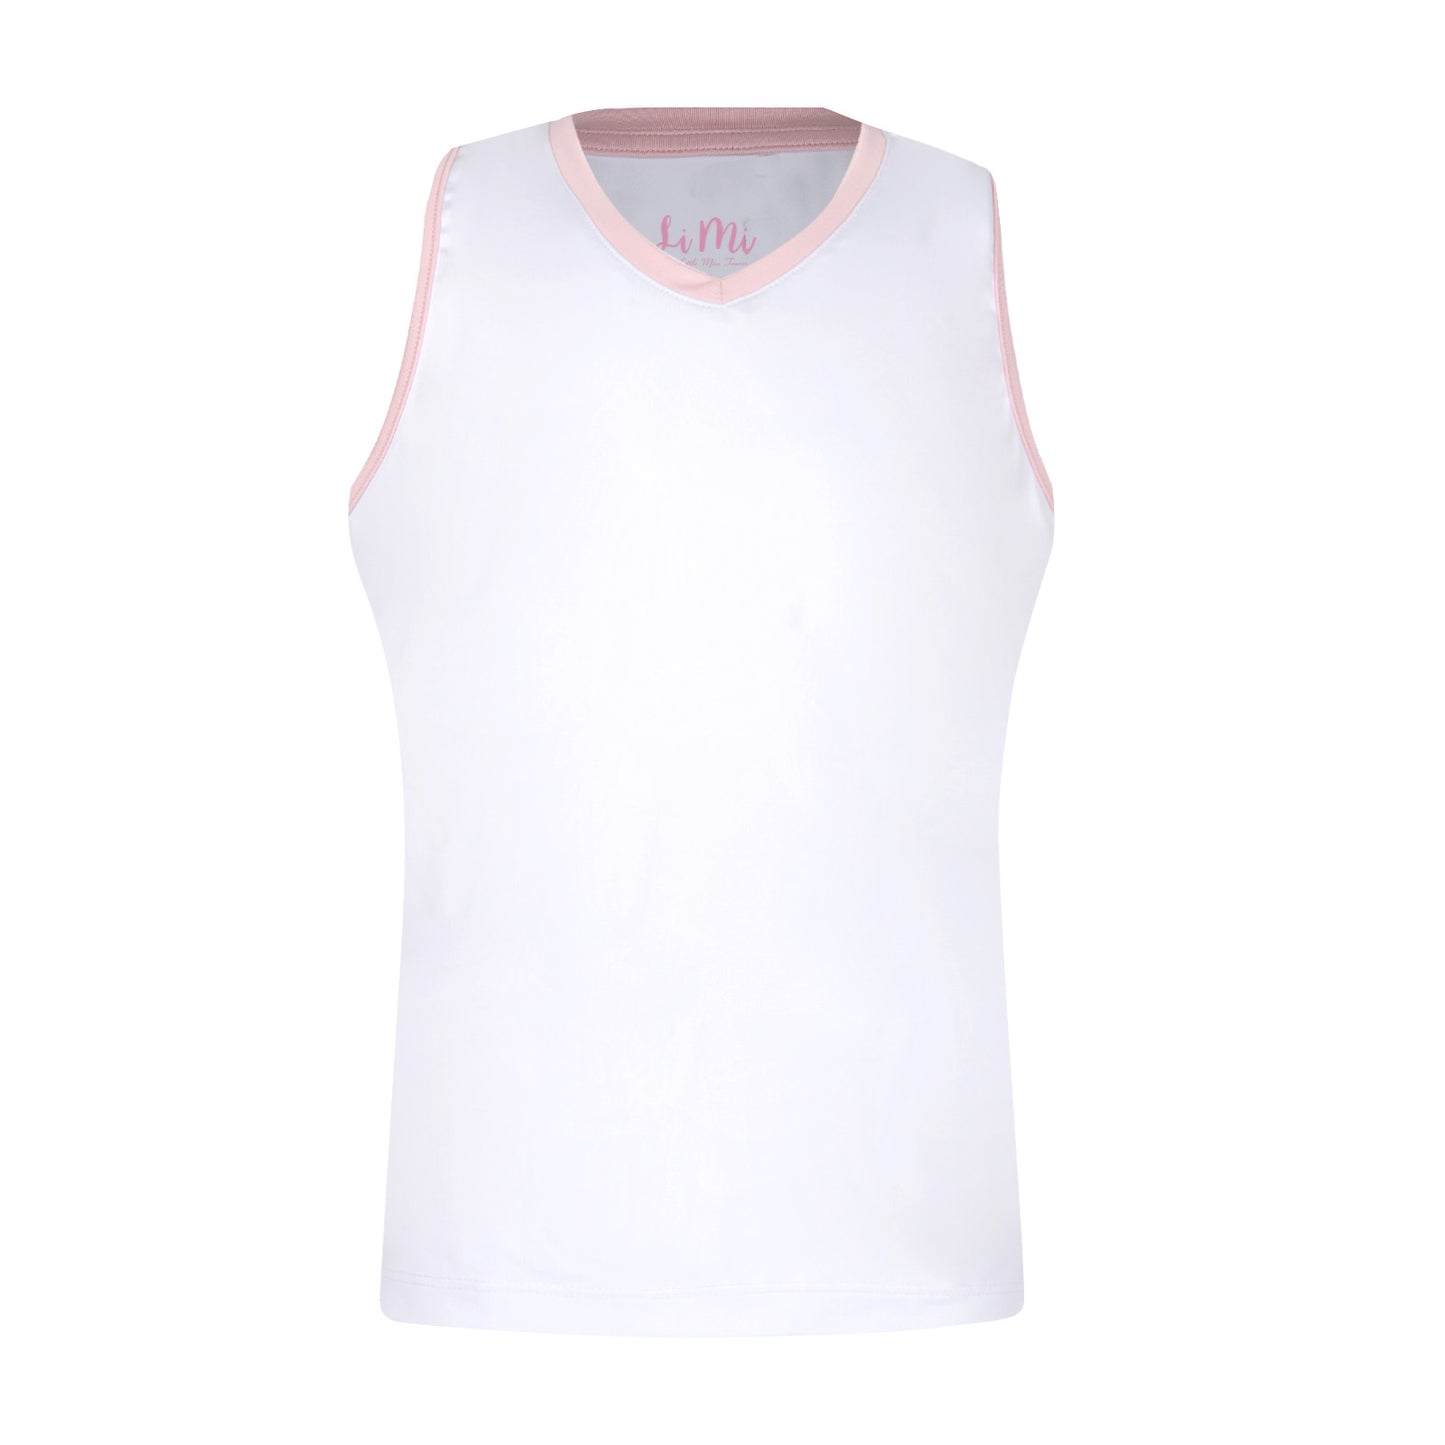 #Carnival Lights White Tank Top - New!